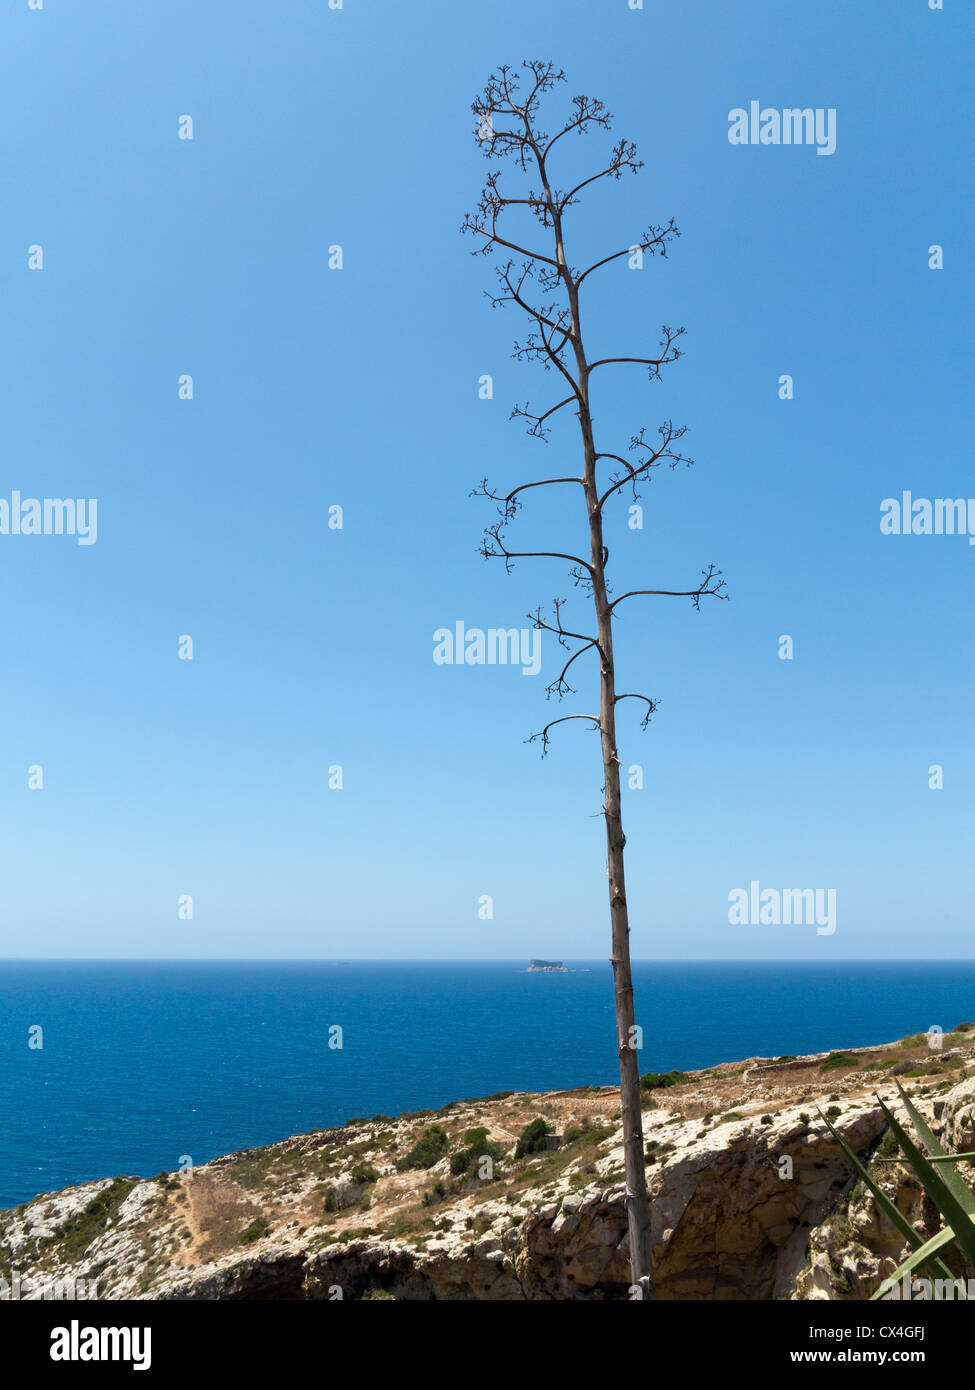 Agave tree almost in silhouette against a clear blue sky and ocean horizon on cliff edge Stock Photo